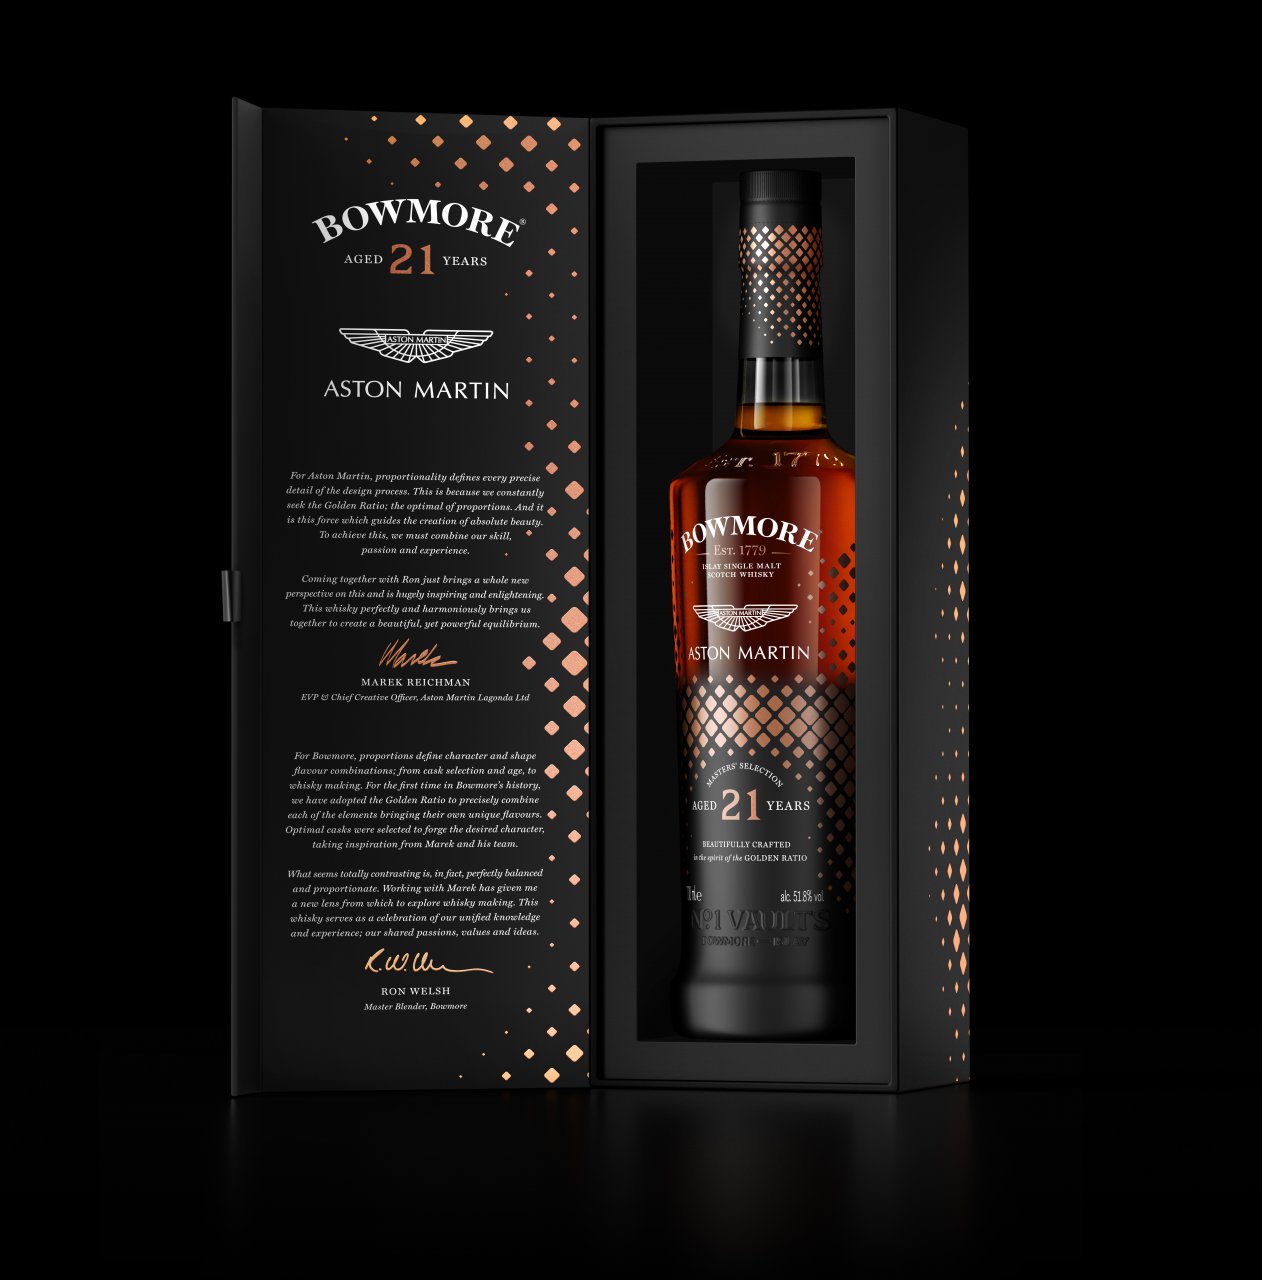 Aston Martin creates limited-edition whiskey with Bowmore Distillery